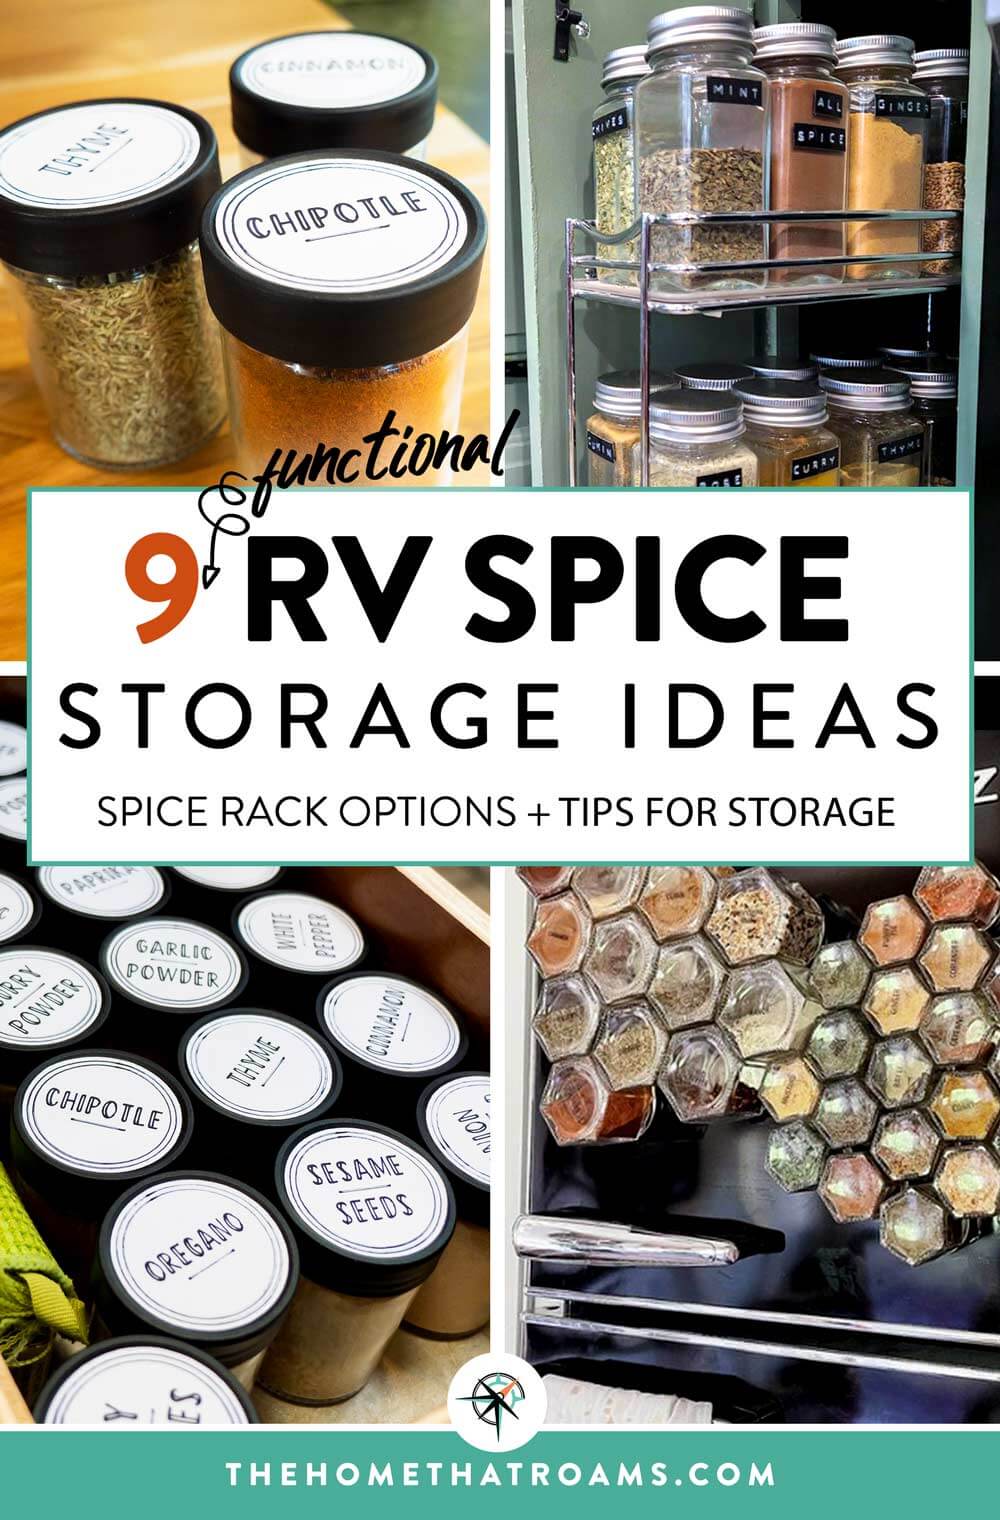 Pinterest image of RV spice storage solutions including spice jars in a drawer, magnetic spice jars on a RV fridge, and spices in a pull-out shelf.